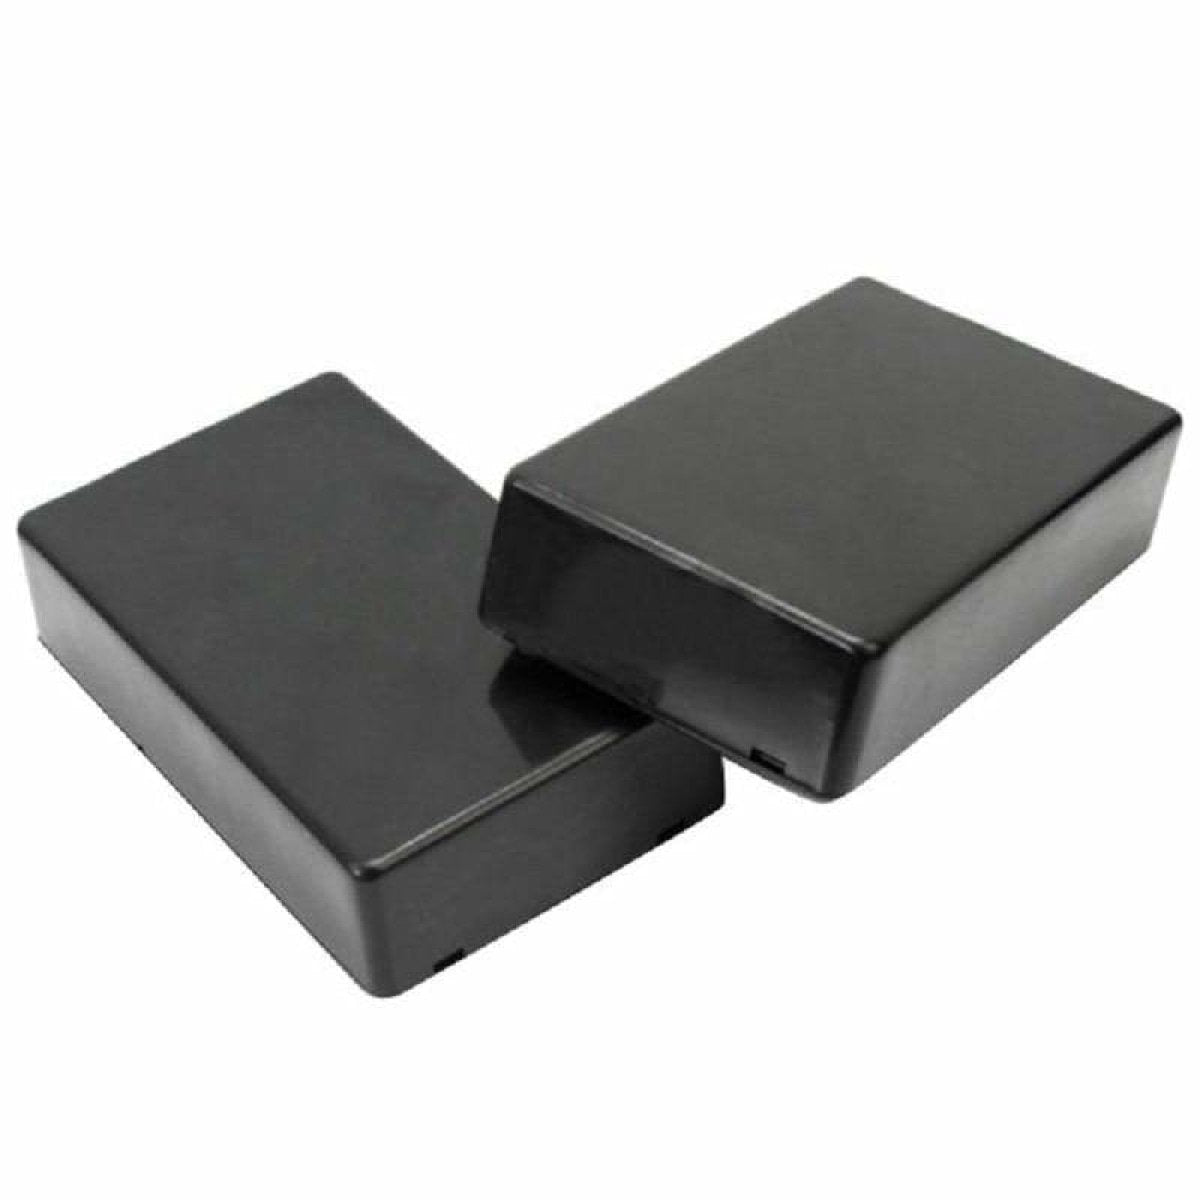 2pcs Plastic Waterproof Project Box Cover Electronic Case Enclosure 100x65x25mm Junction Box - Asia Sell